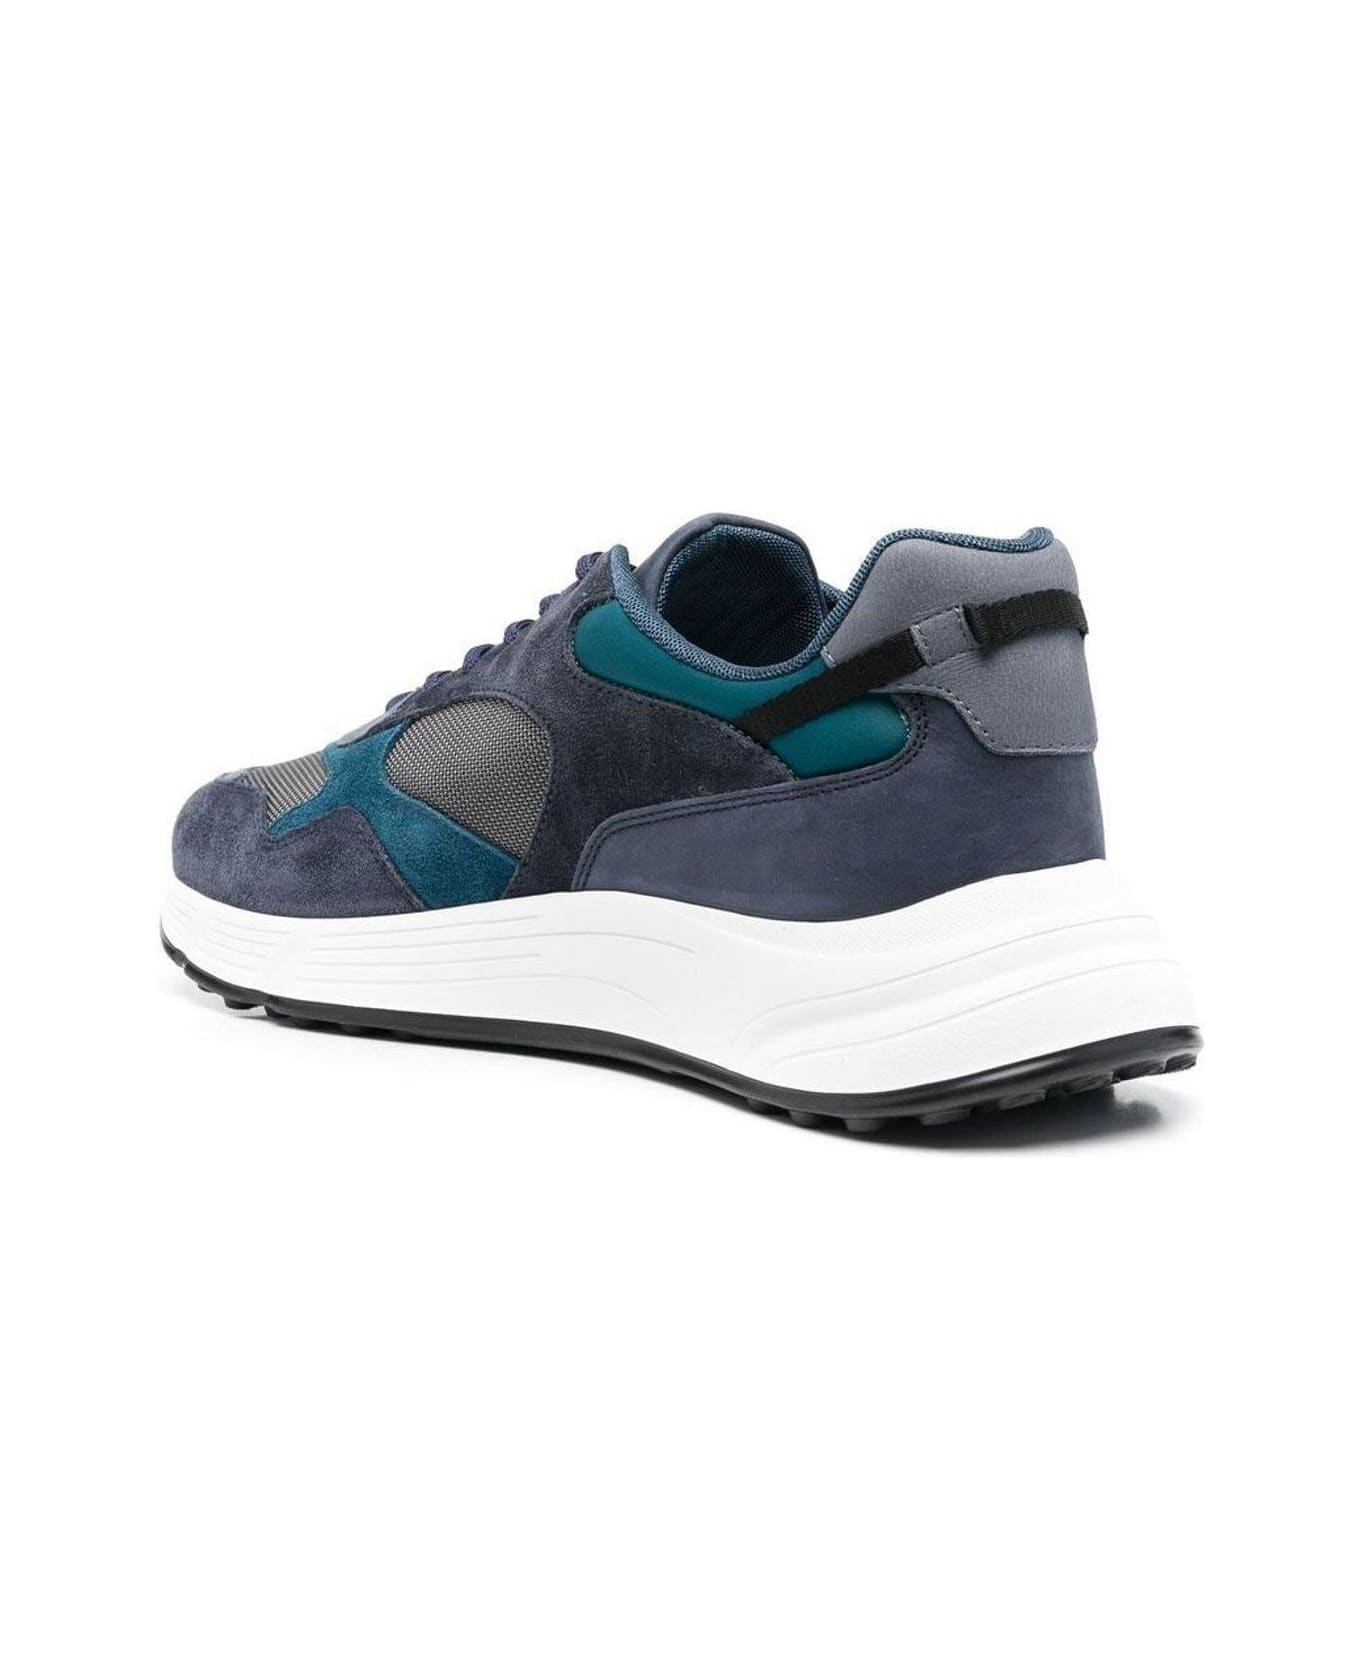 Hogan Panelled Lace-up Sneakers - Blu/grigio